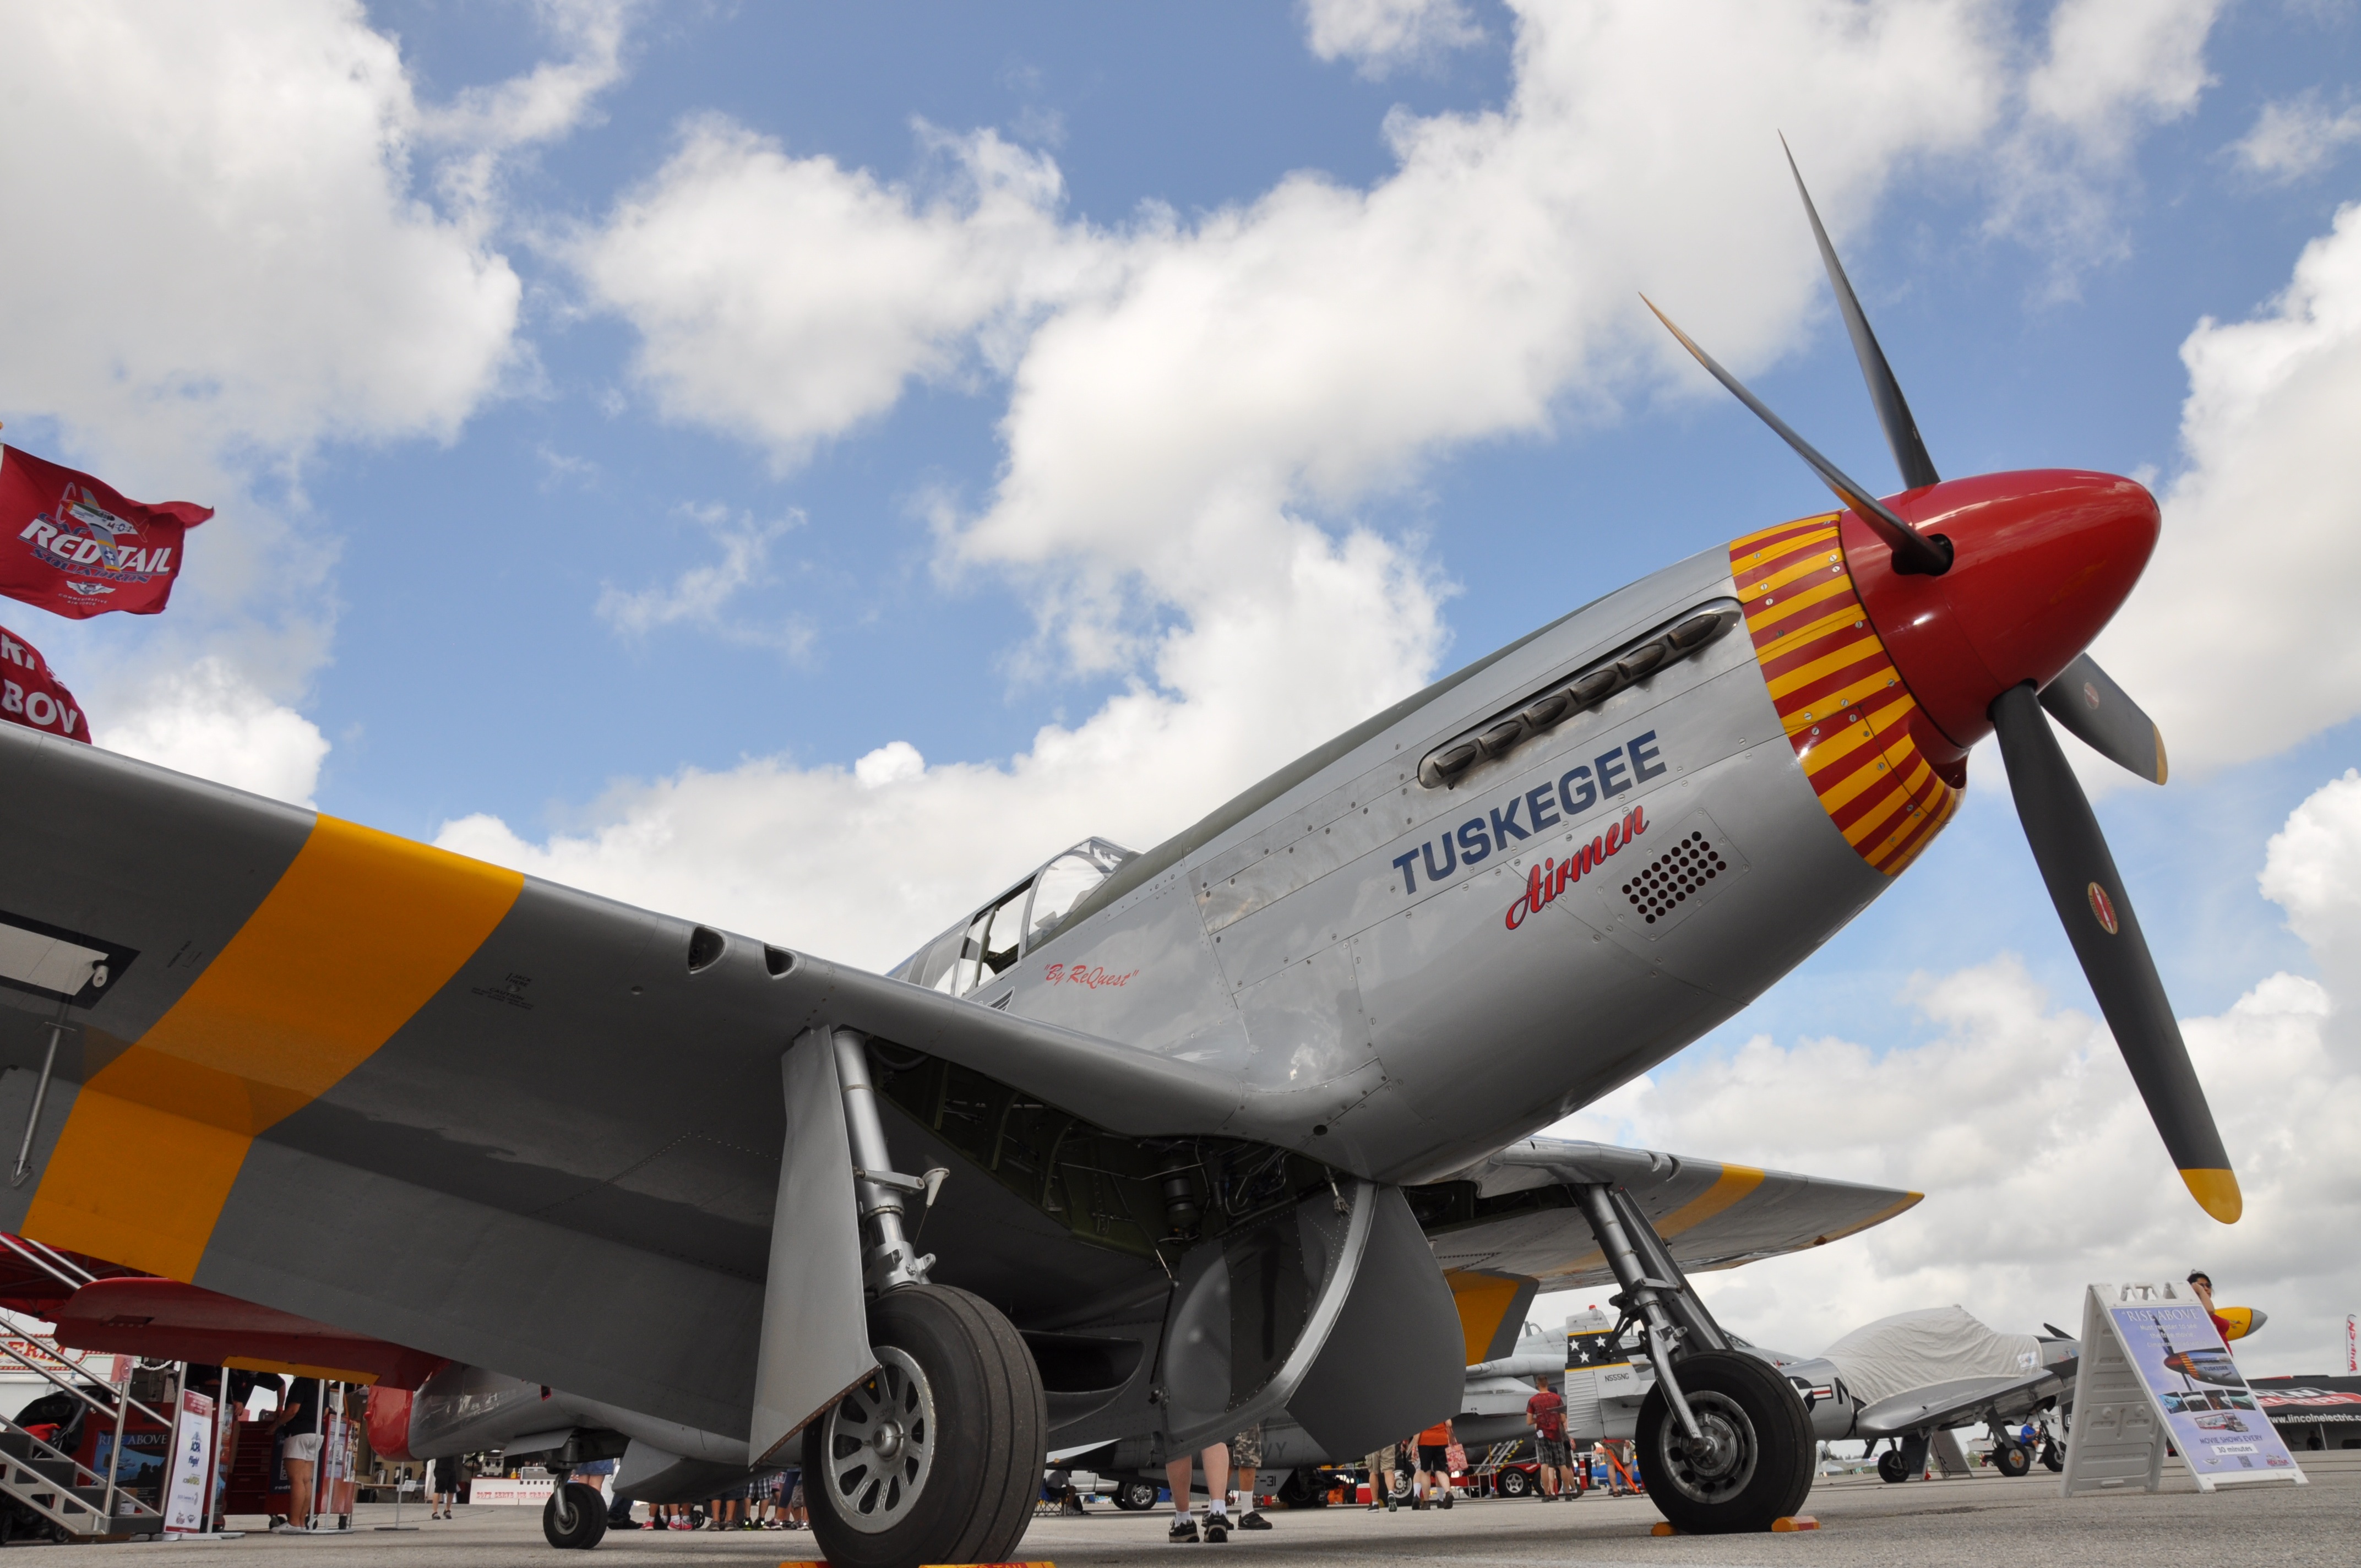 Red Tail Squadron’s Mobile Exhibit honoring the Tuskegee Airmen opens inside the Hangar on Friday. This is fully expandable, movie theater with 30 seats, air conditioned, that shows a 30 min documentary on the Tuskegee, “Rise Above.”I Image by Warbirds News)